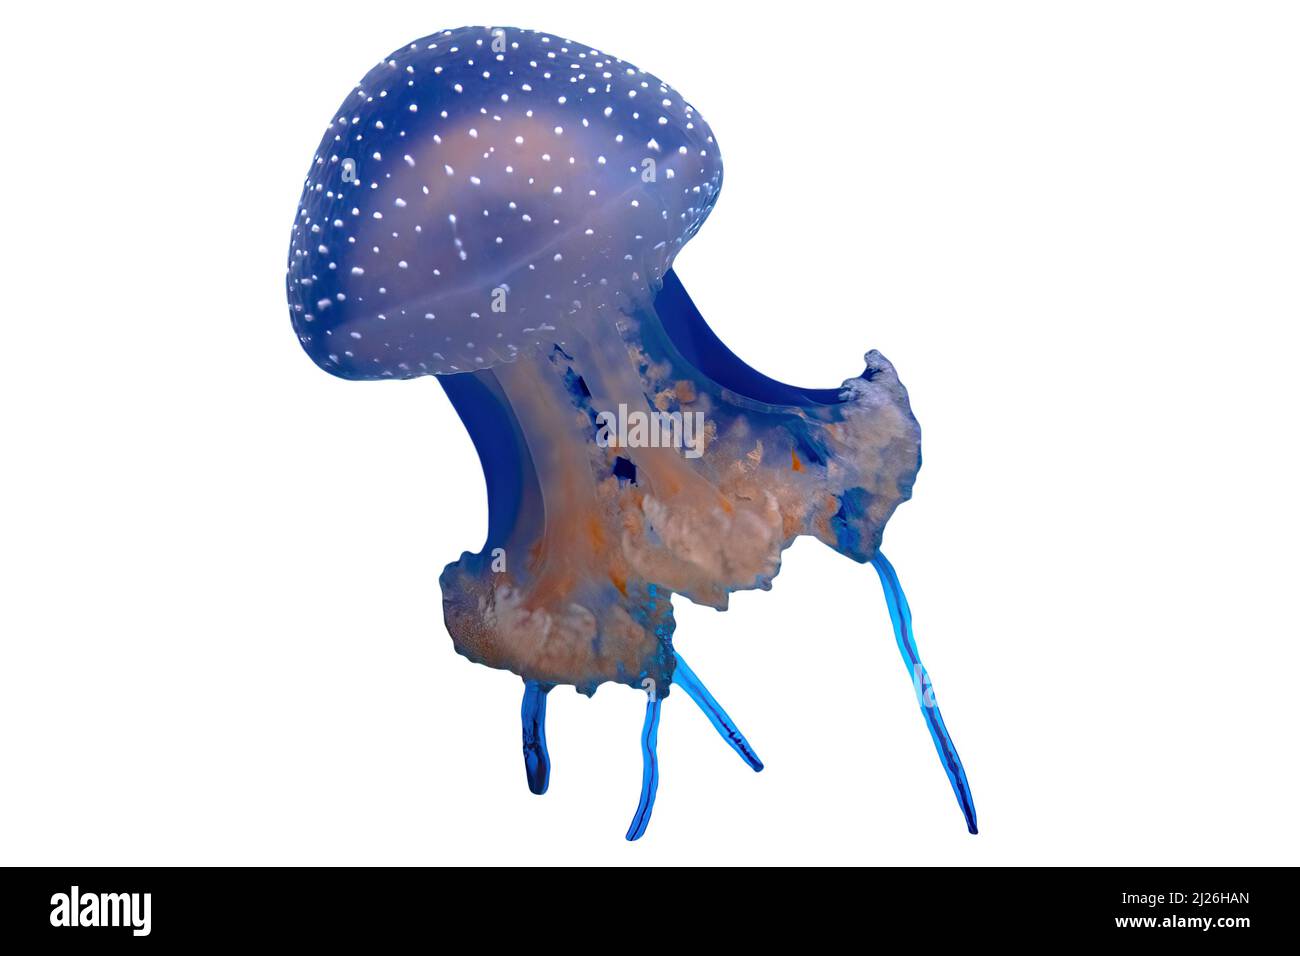 Australian spotted Jellyfish floating isolated on white background. Phyllorhiza punctata species living in tropical waters of the western Pacific from Stock Photo